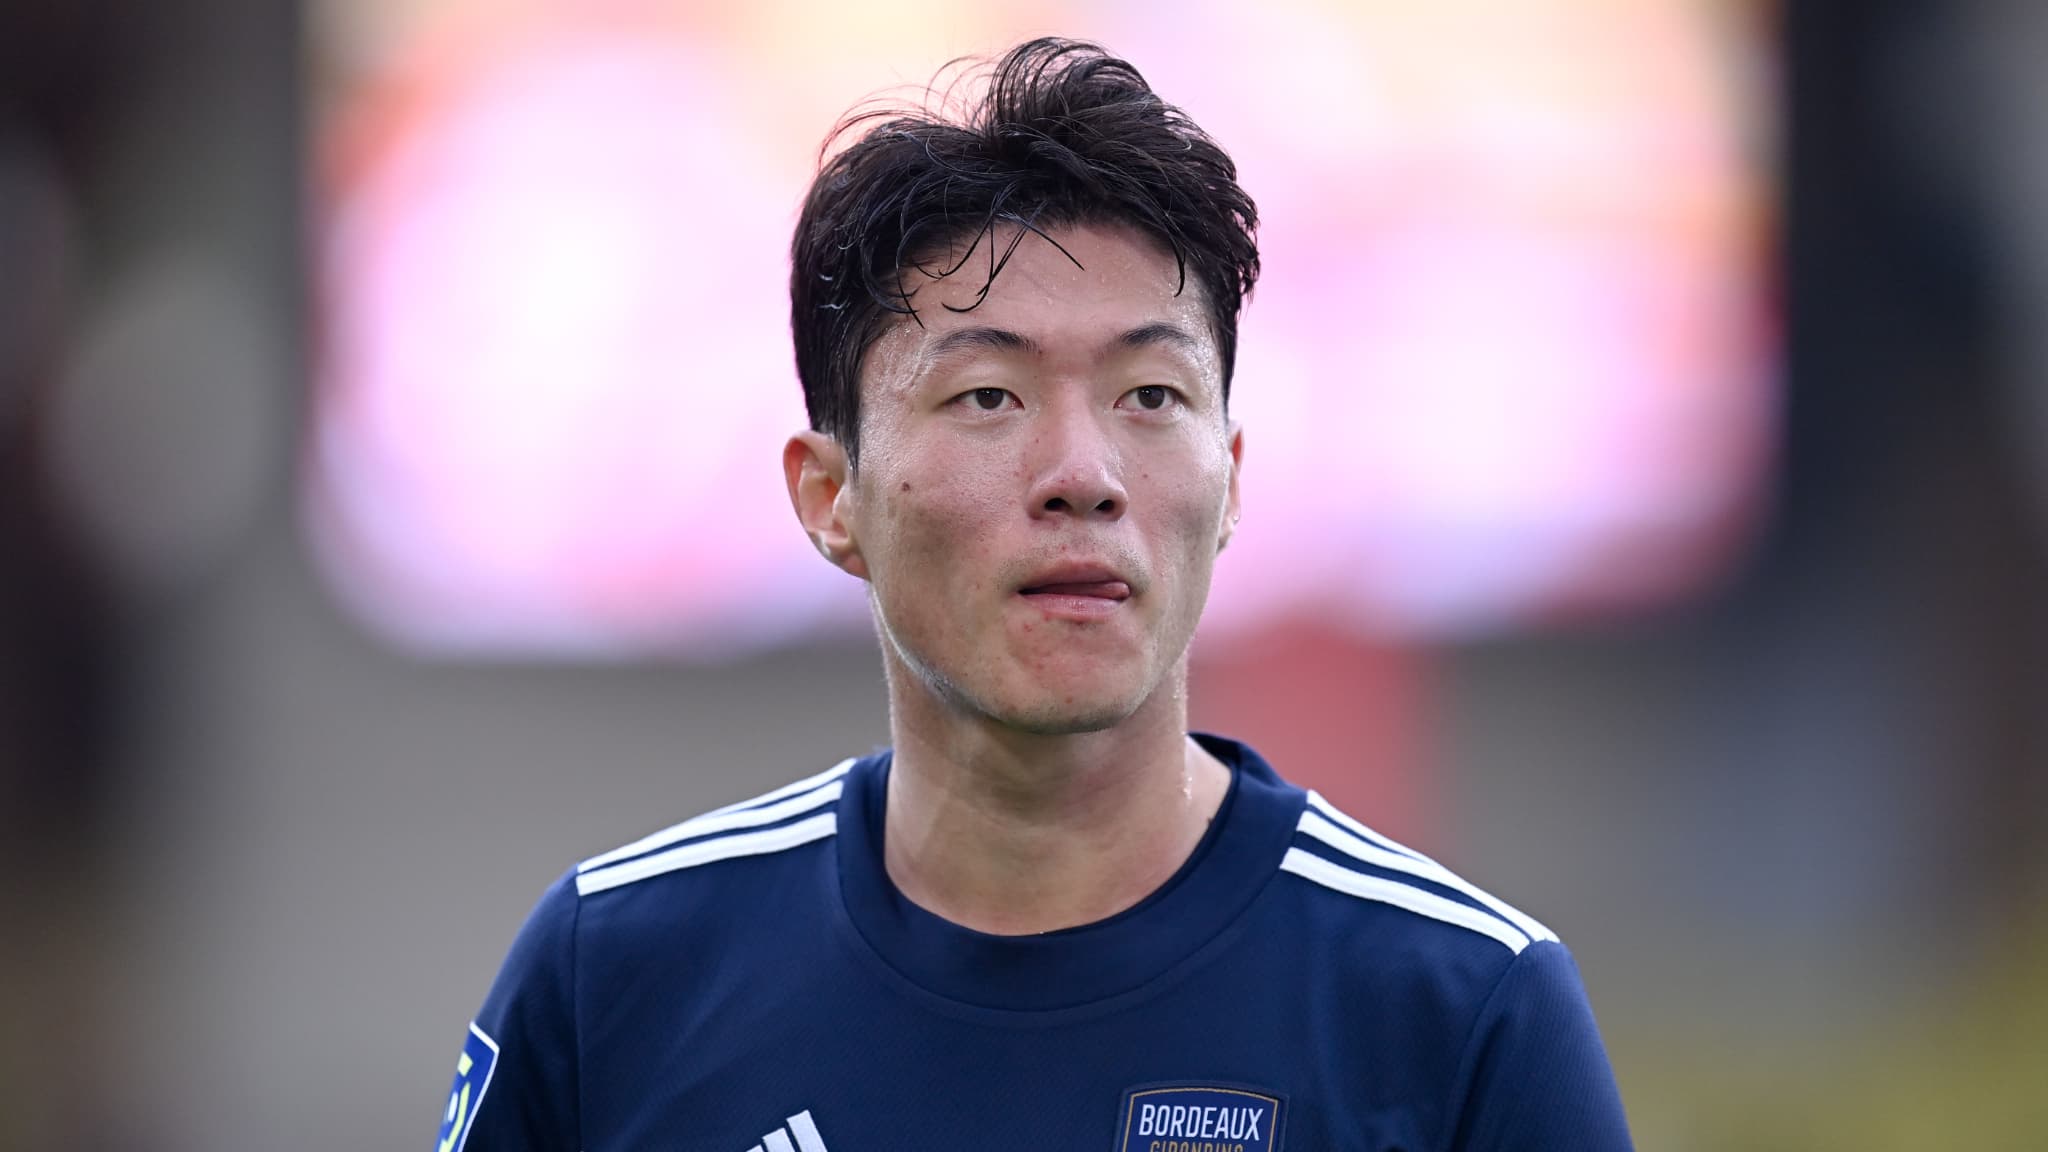 Hwang Ui-jo Age, Salary, Net worth, Current Teams, Career, Height, and much more